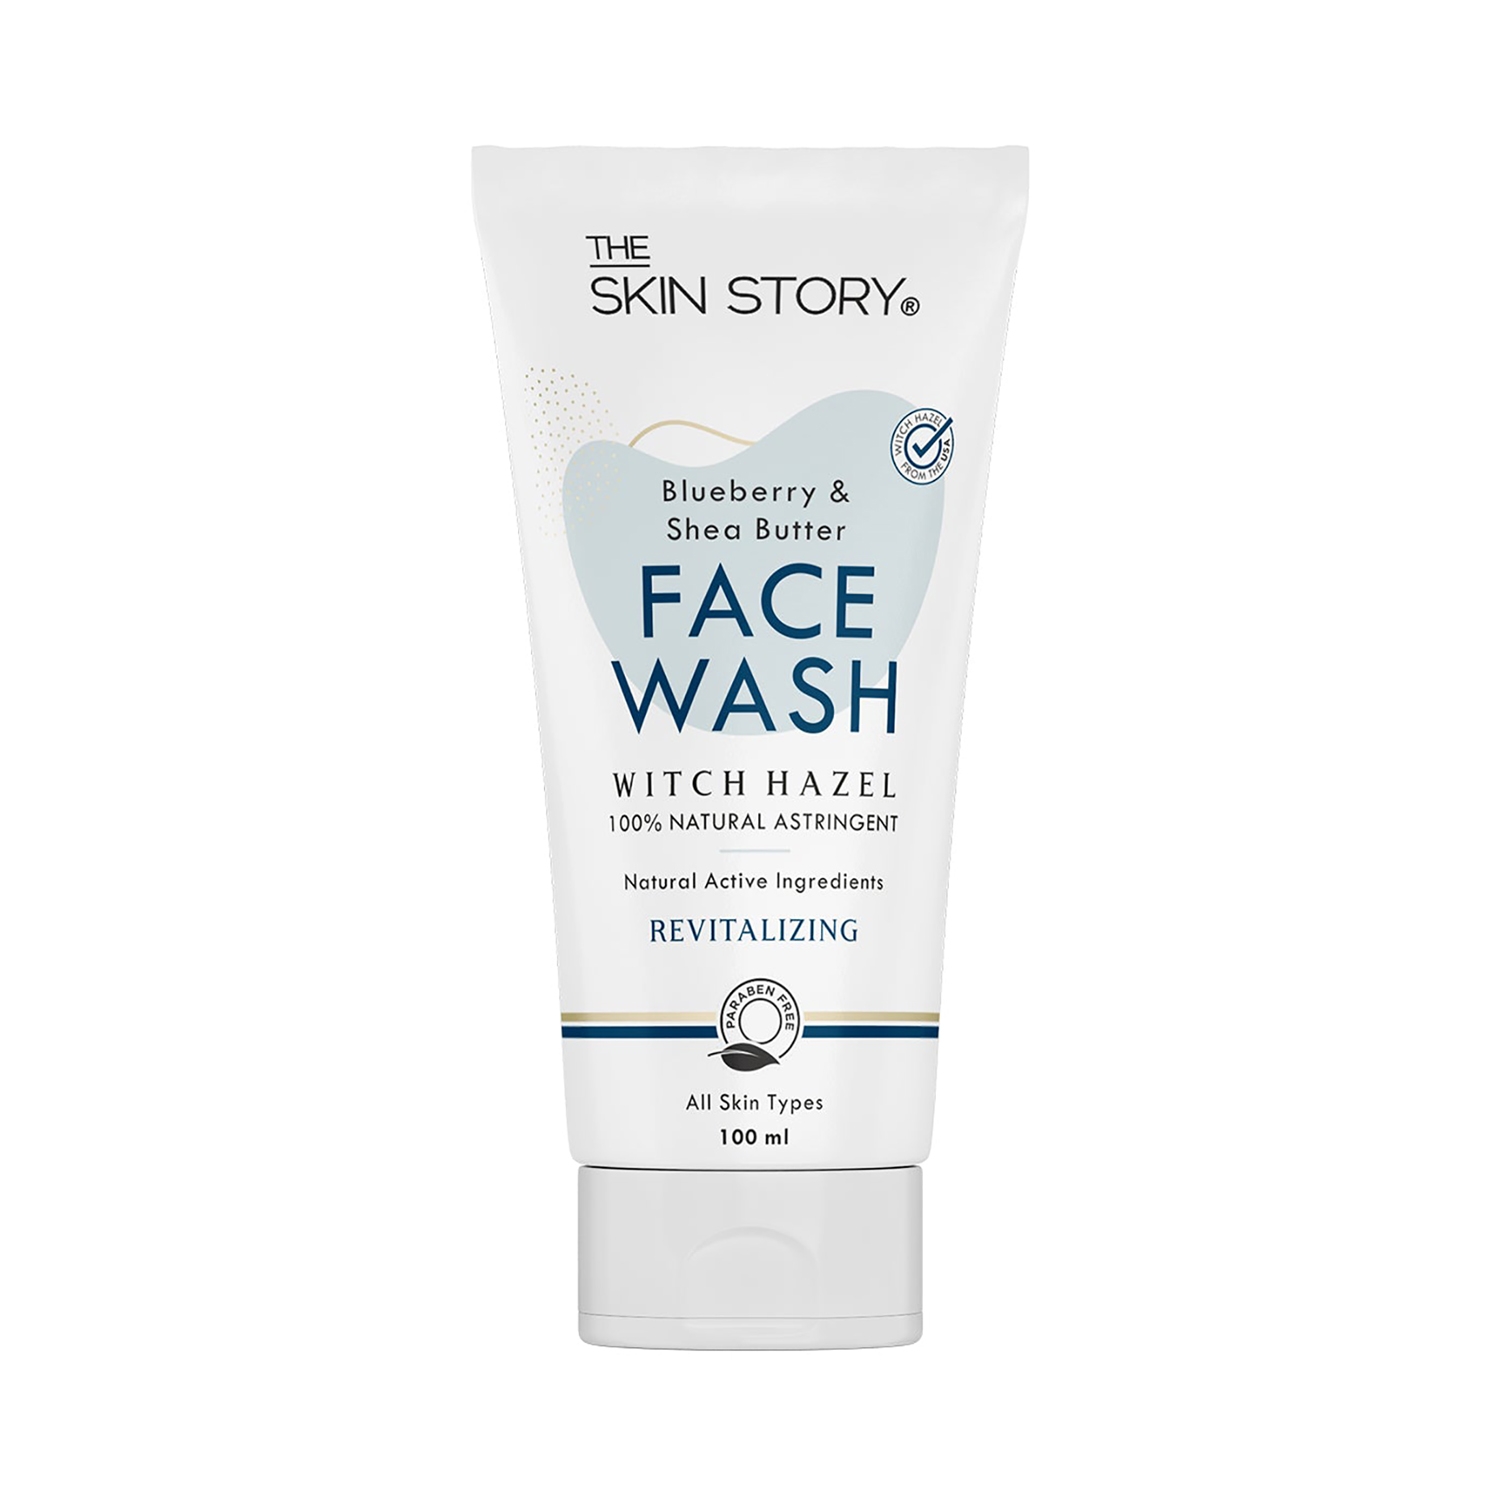 The Skin Story | The Skin Story Shea Butter & Blueberry Facewash (100ml)